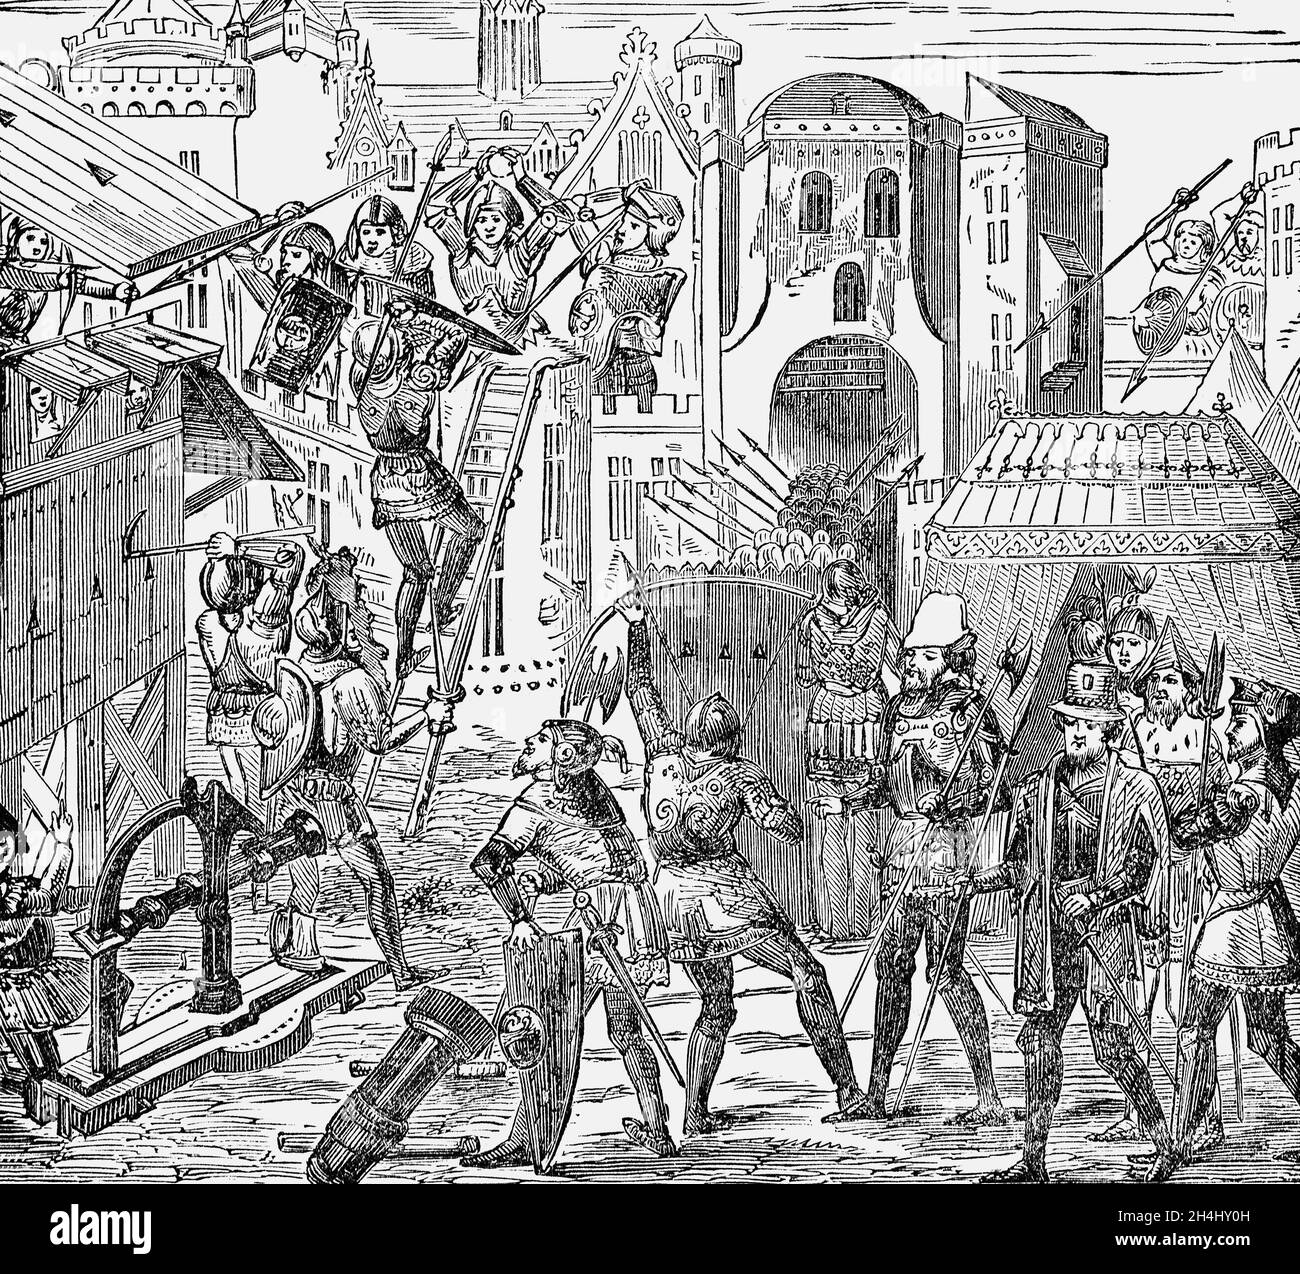 A late 19th Century illustration of a 15th century siege. With the adoptation of castle fortifications, siege weapons were utilised to destroy the fortifications or damage the defenses of the defending army. Seen here is a siege tower, built of wood on a frame with wheels that allowed it to be pushed up against the walls of a fortification. Other weapons included the Ballista that launched a large projectile; the Battering Ram; the Catapult to launch a projectile and the Trebuchet a type of catapult that launched projectiles like rocks with the use of a large swinging arm. Stock Photo